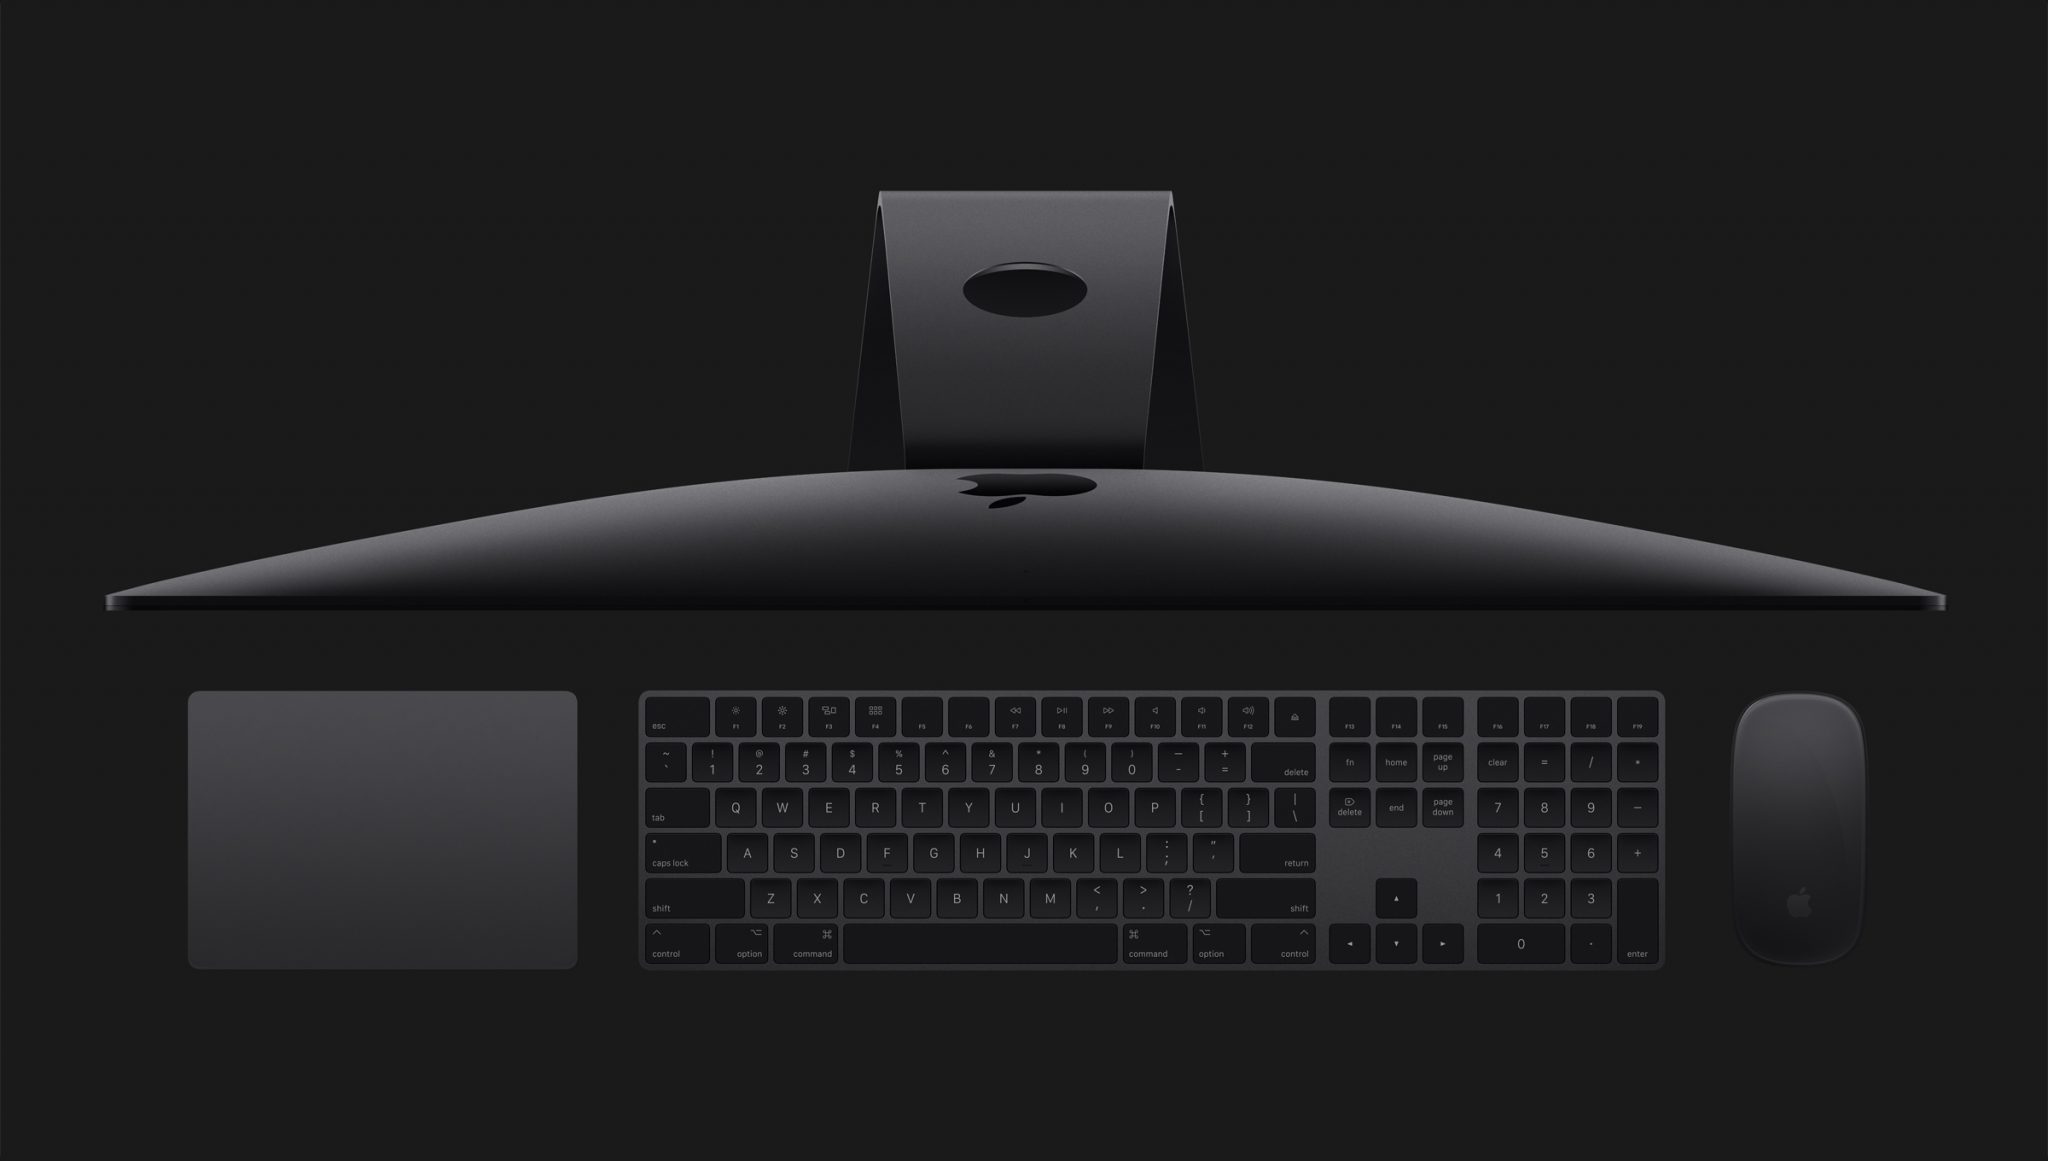 new 2017 imac pro accessories - Apple debuts new iMac Pro while refreshing the MacBooks and iMacs to 7th Generation Kaby Lake processors